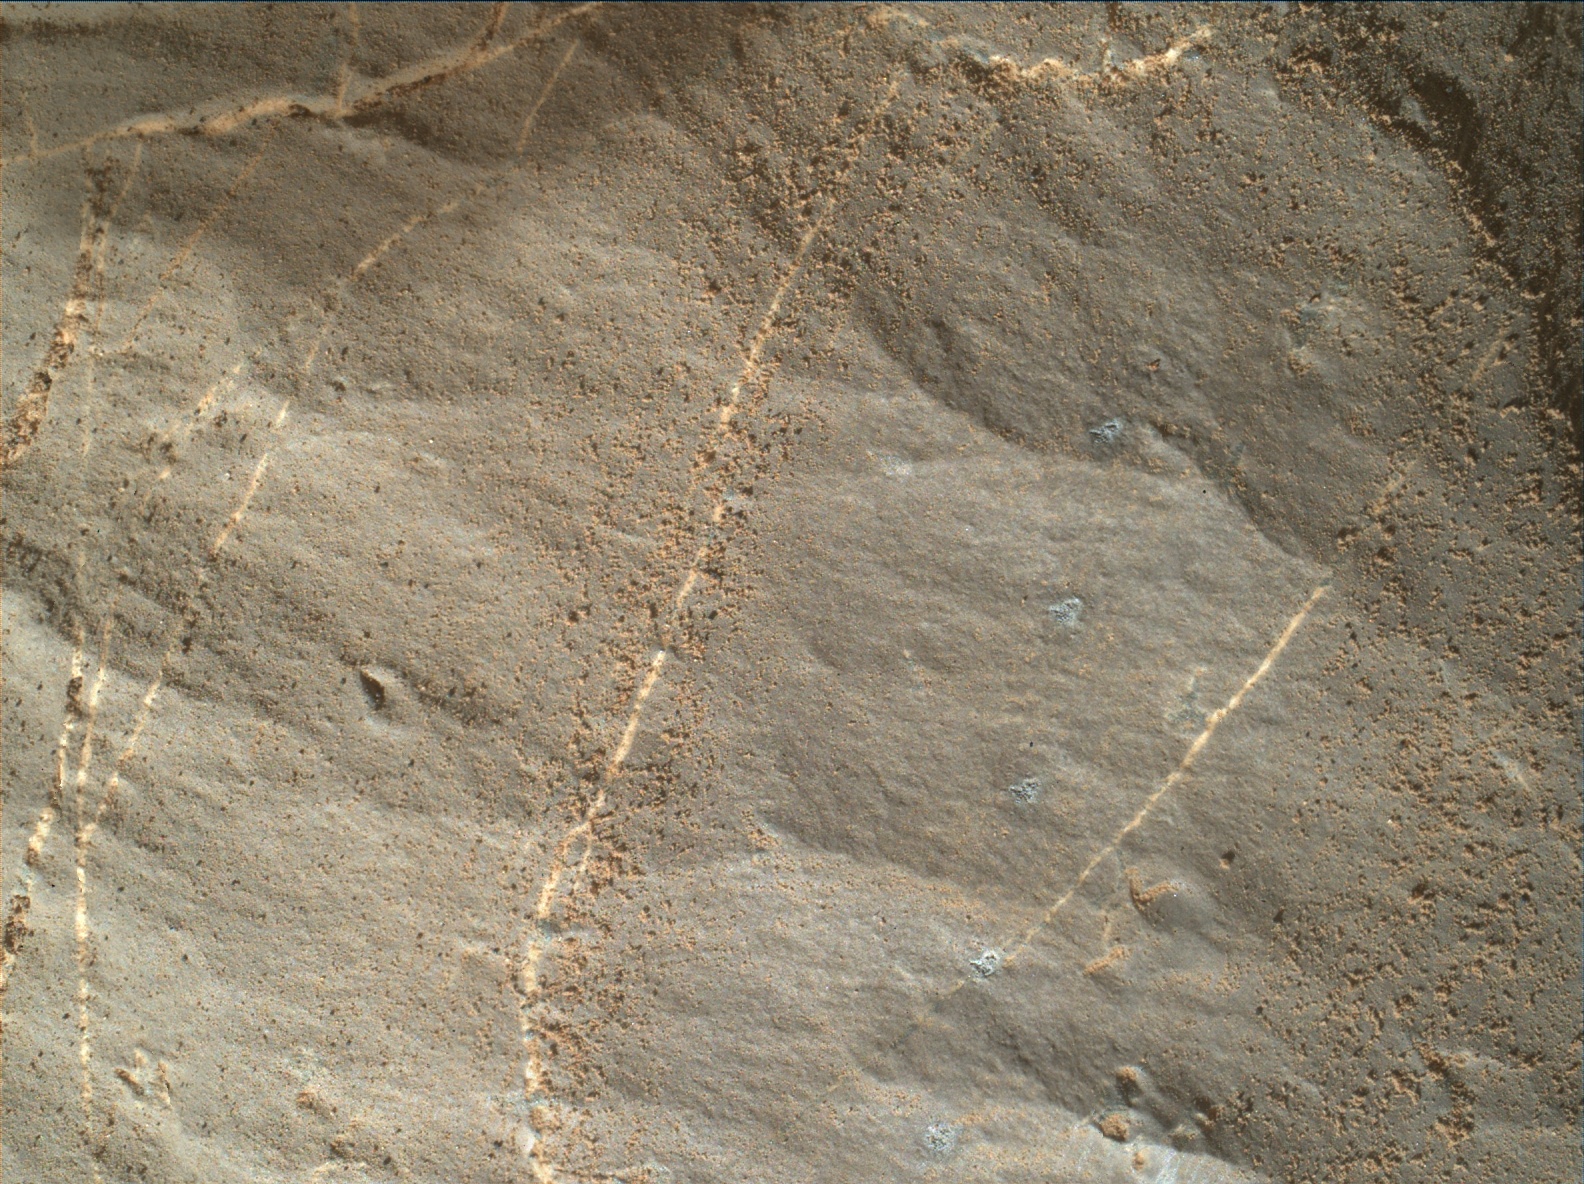 Nasa's Mars rover Curiosity acquired this image using its Mars Hand Lens Imager (MAHLI) on Sol 1894